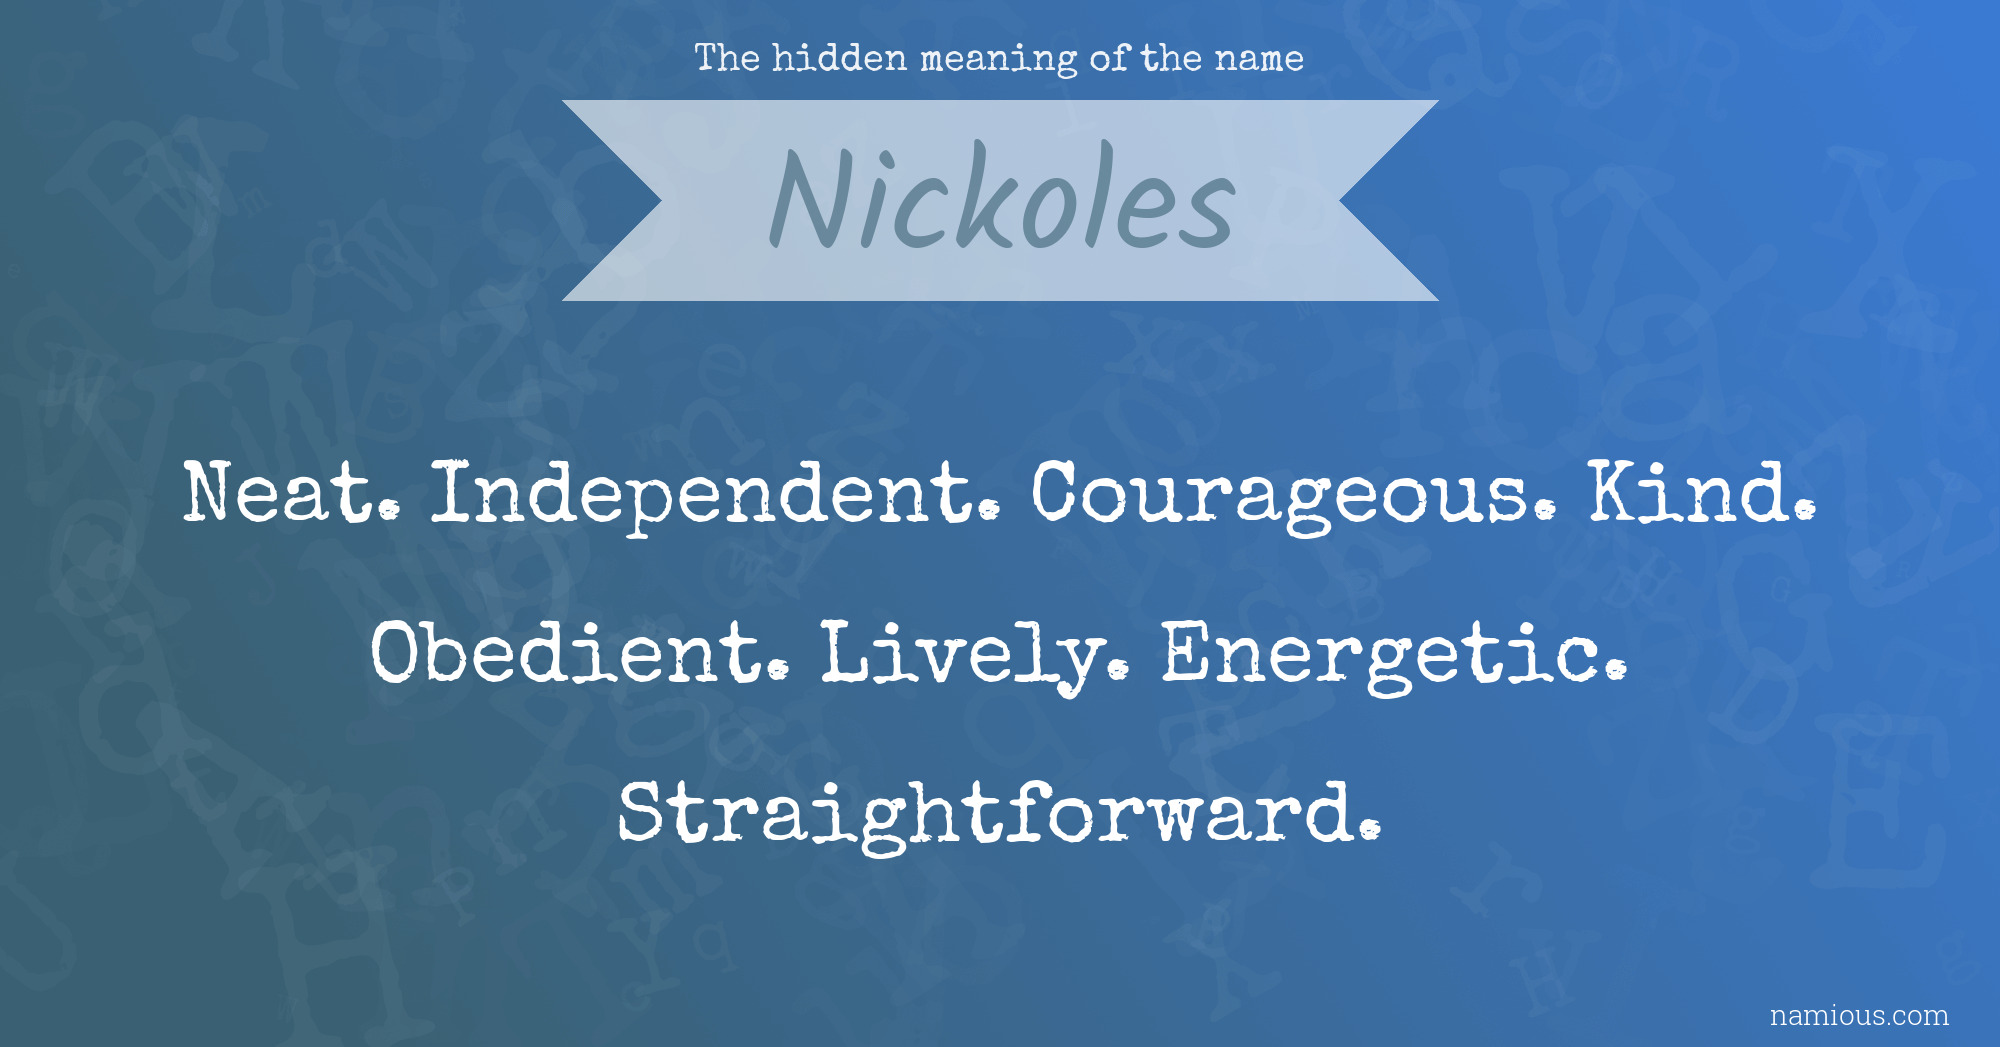 The hidden meaning of the name Nickoles